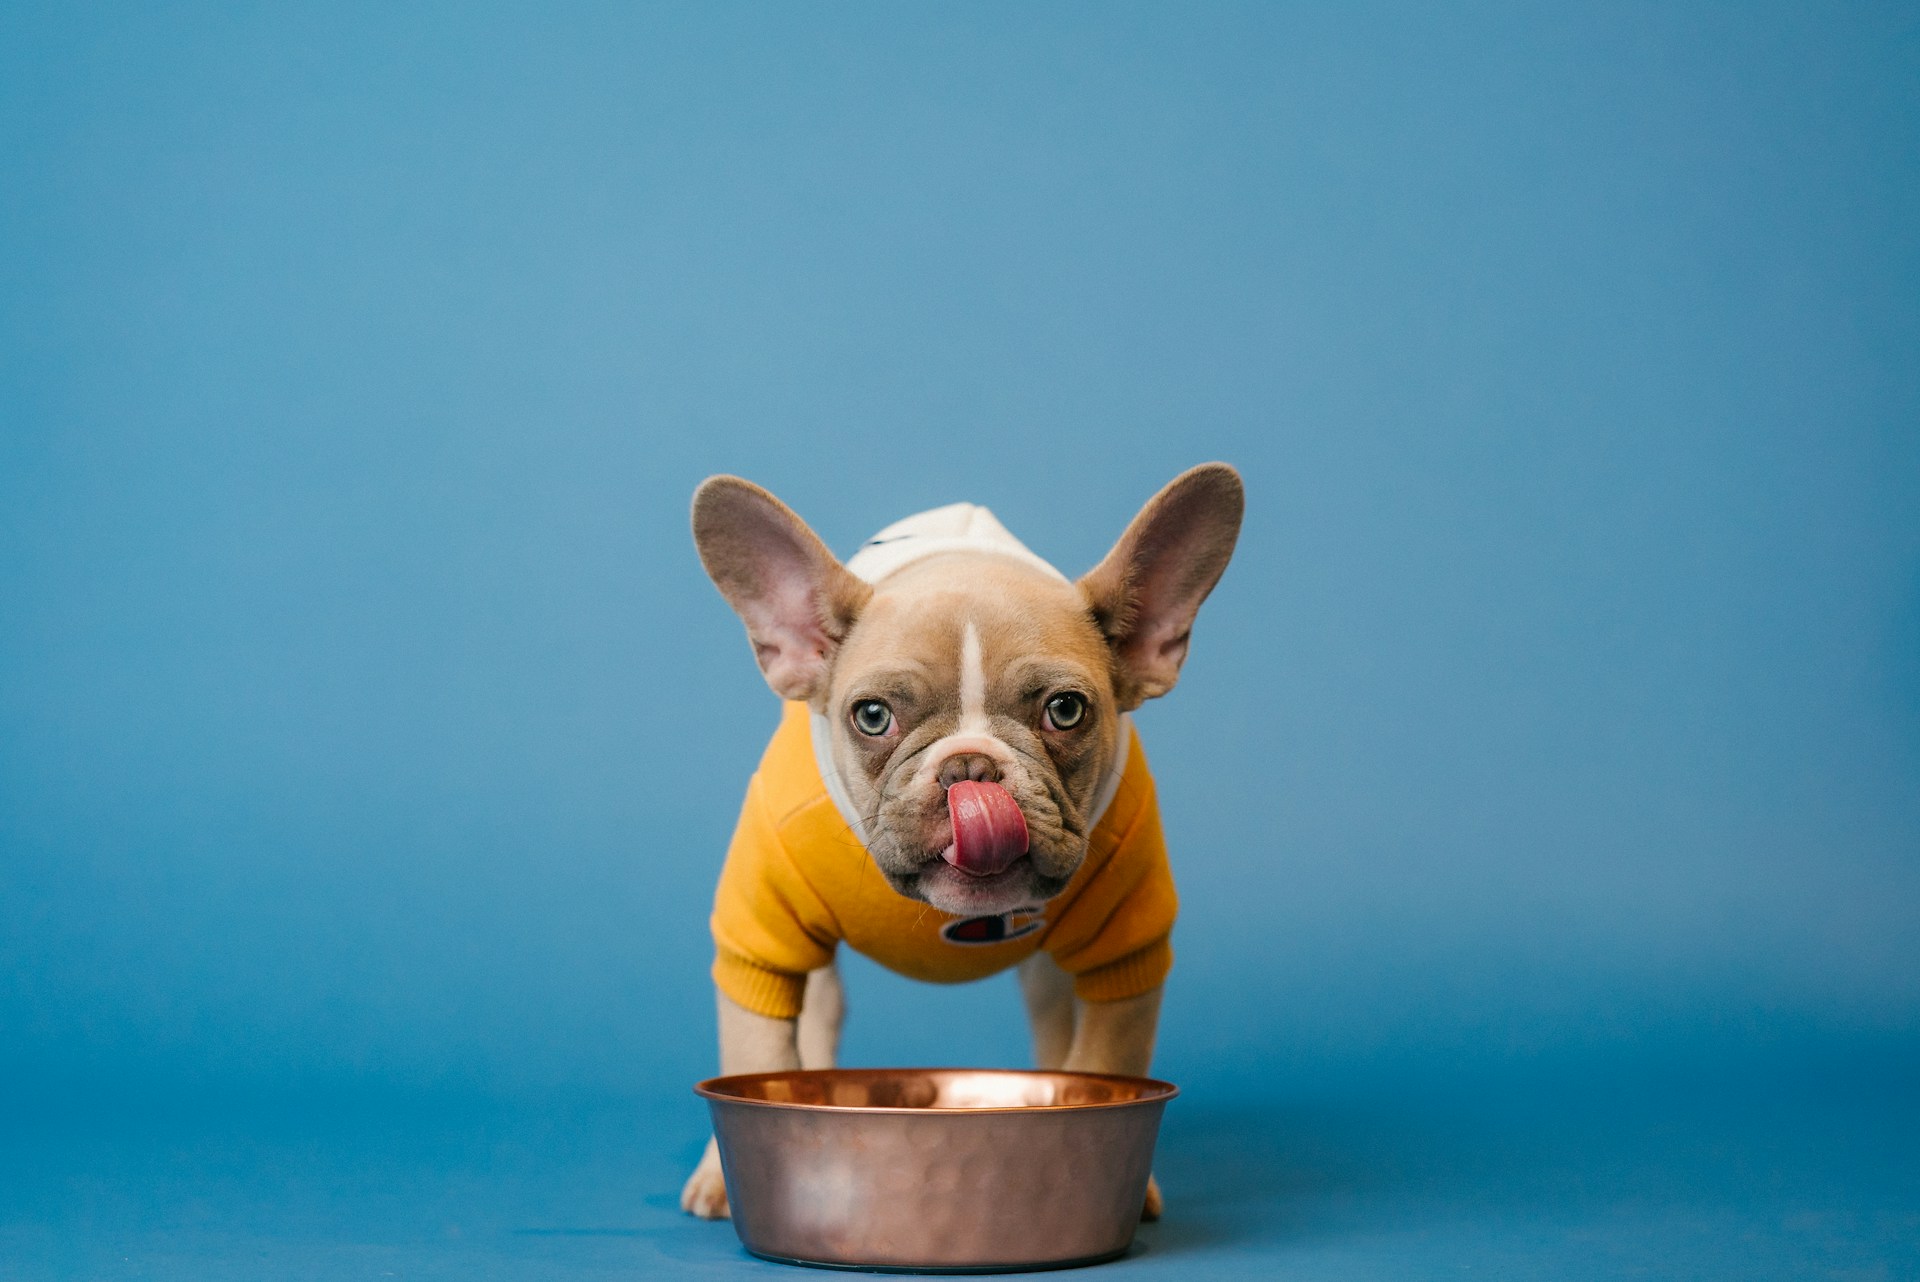 bull dog in orange sweater drinking out of dog bowl